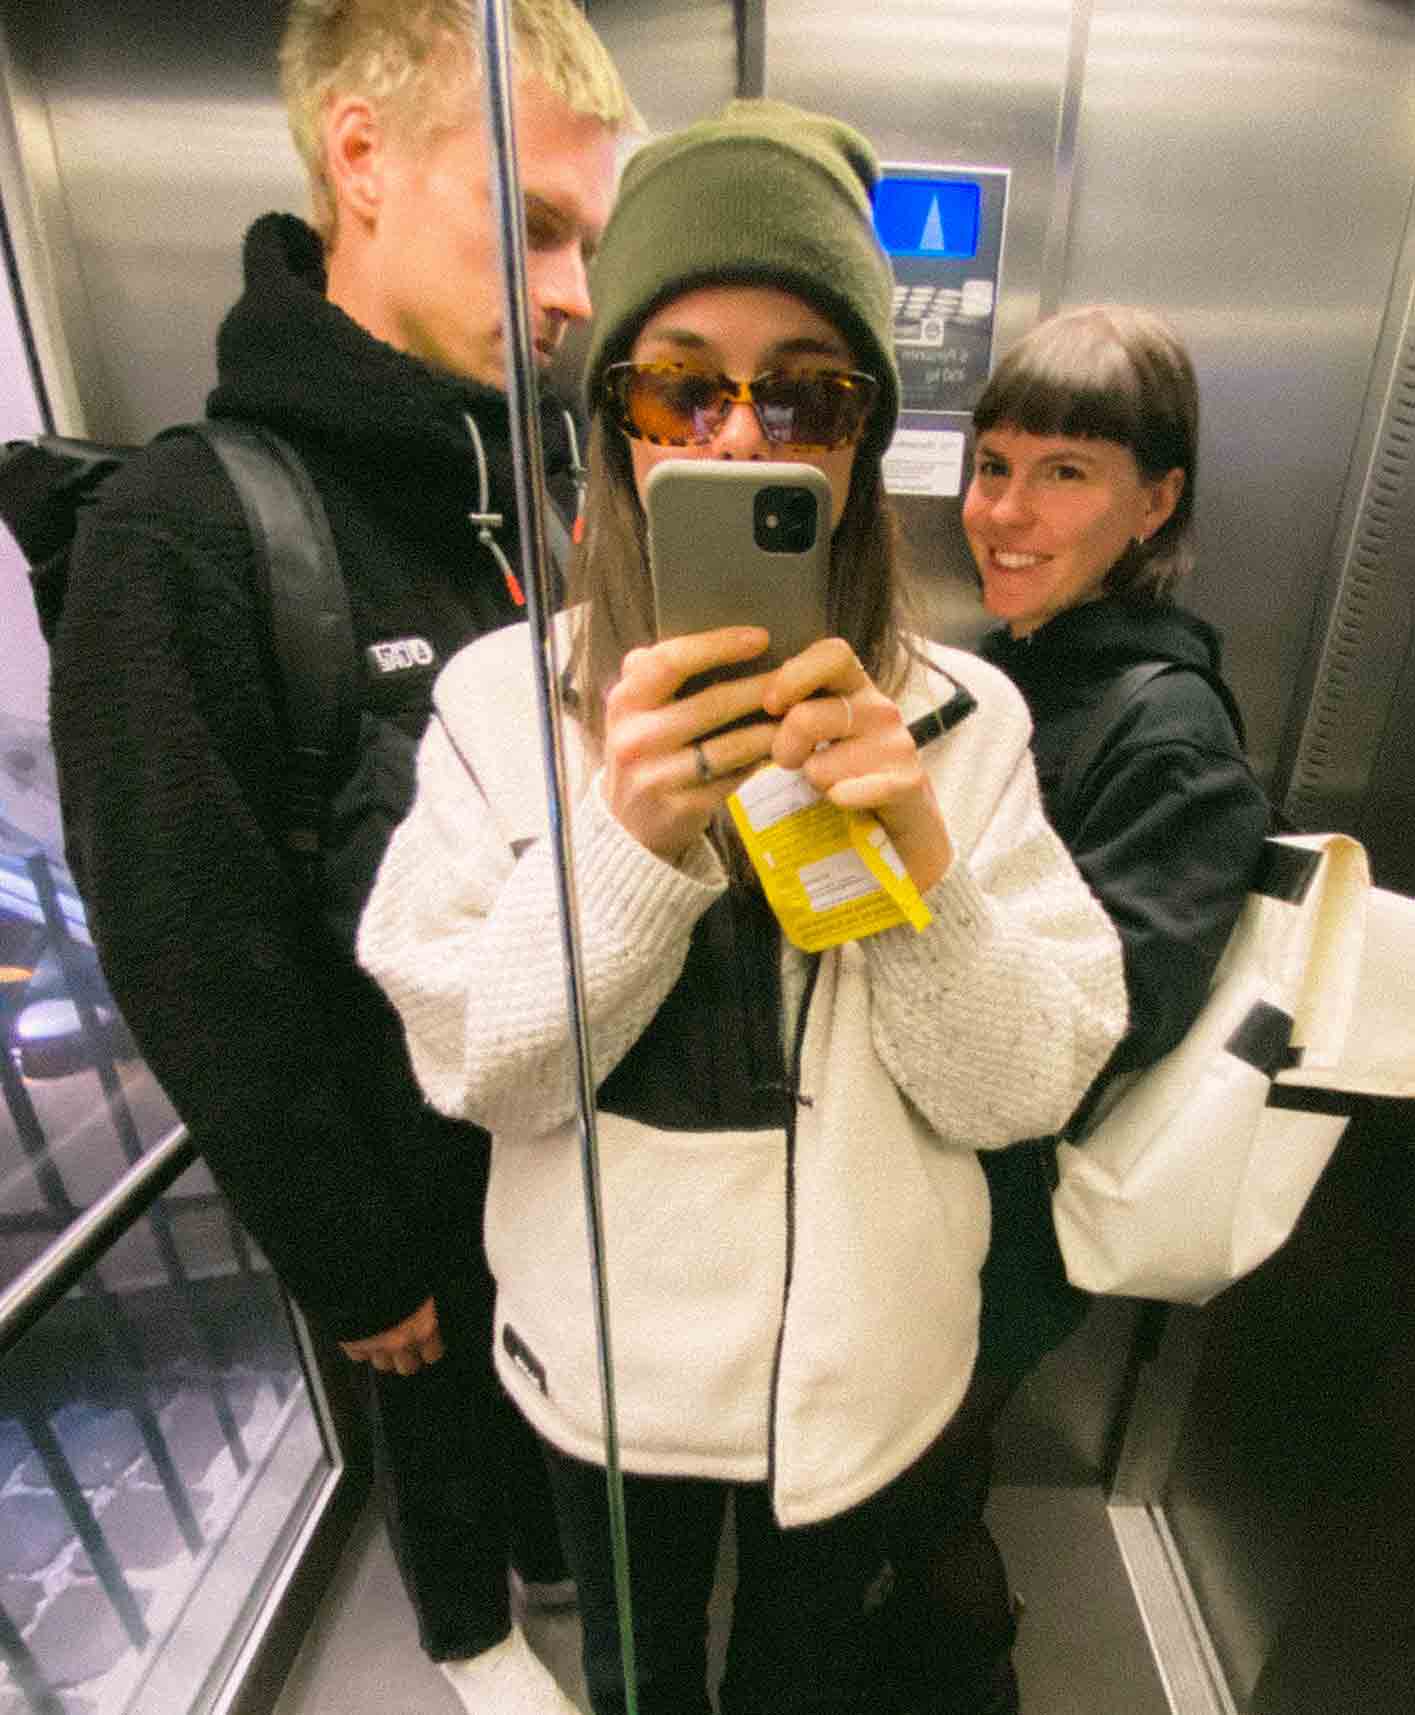 A selfie of the three co-founders of RAWTY in fish-eye style standing in an elevator next to each other wearing outdoor clothes.